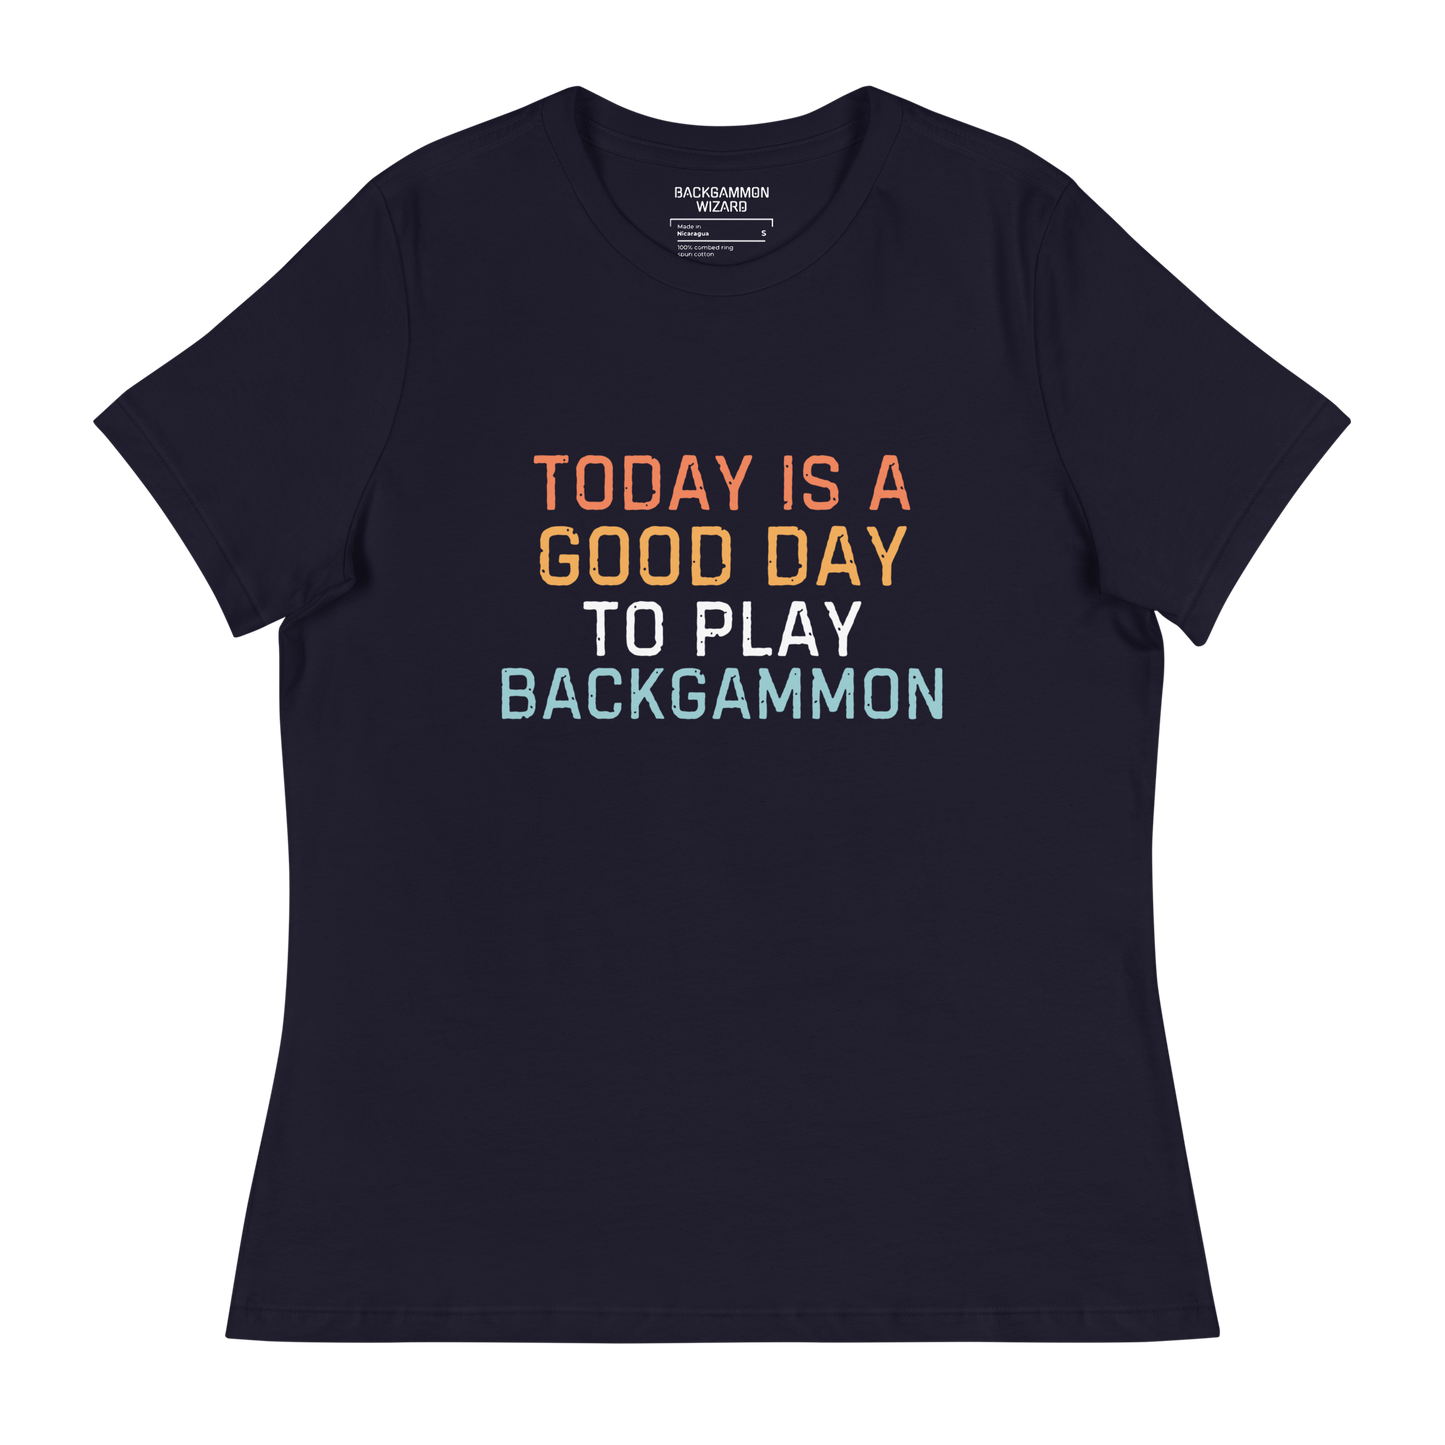 'TODAY IS A GOOD DAY TO PLAY BACKGAMMON' Women's Shirt